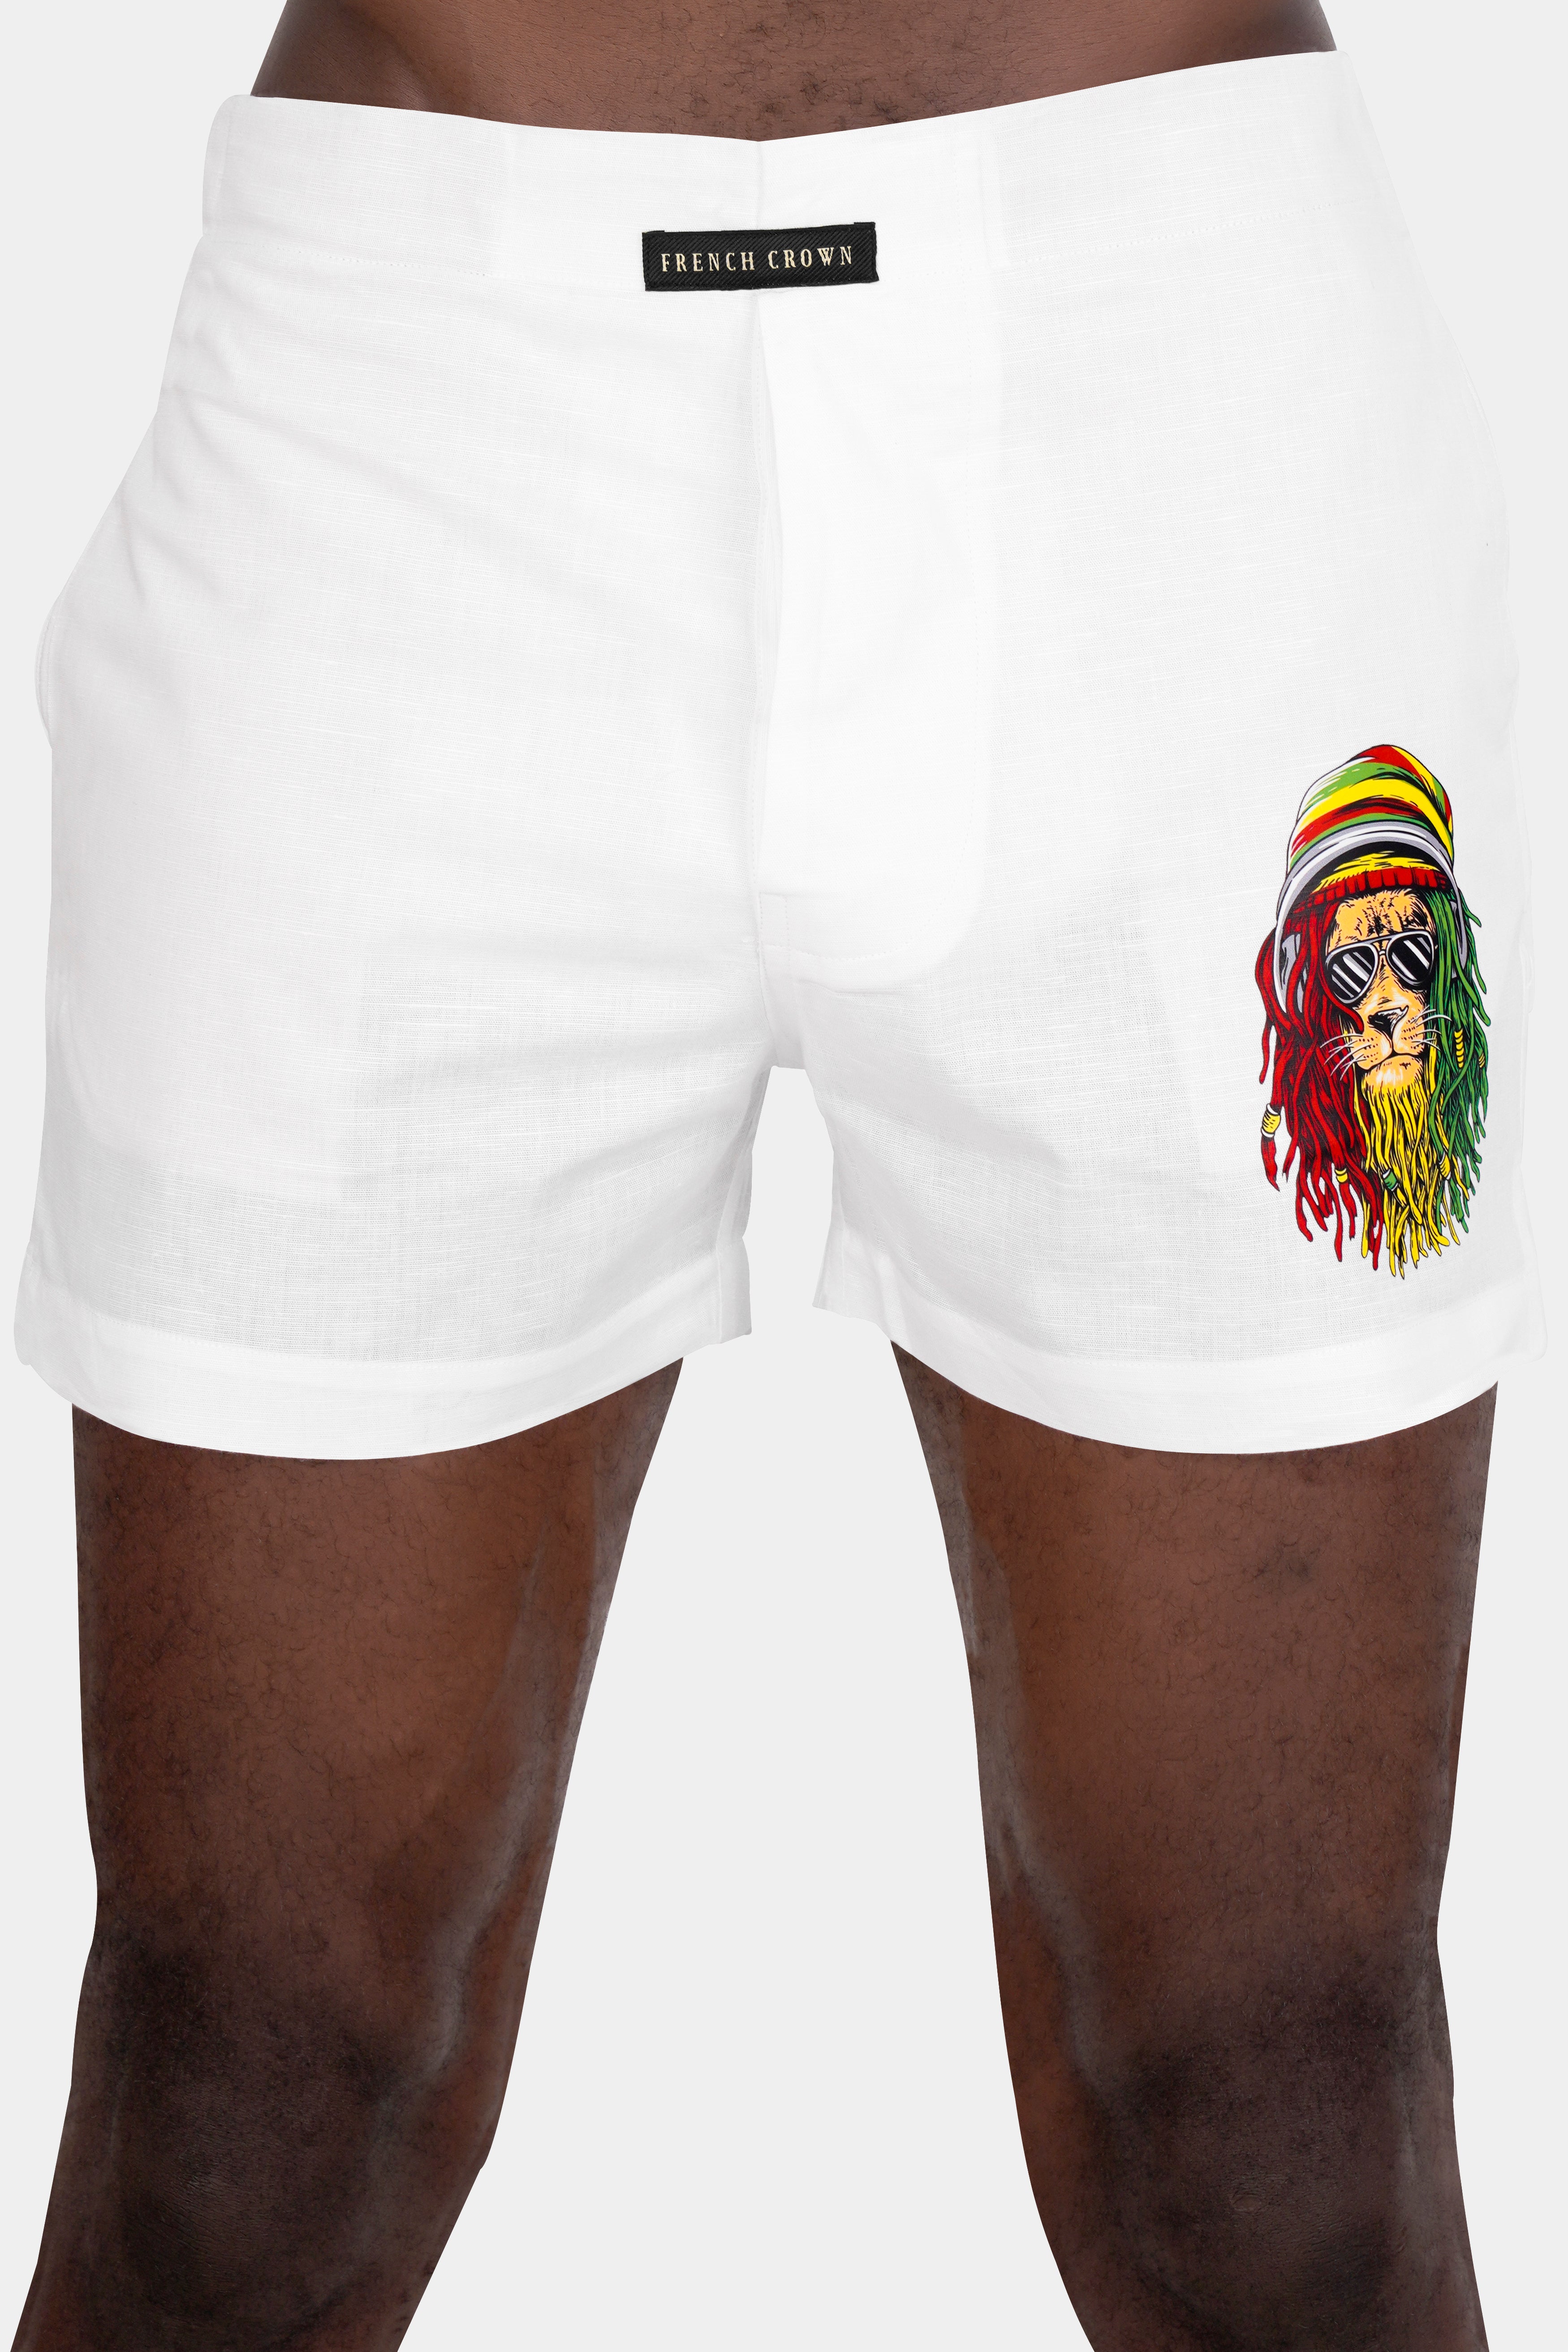 Bright White Funky Lion Printed Luxurious Linen Boxers BX471-RPRT104-28, BX471-RPRT104-30, BX471-RPRT104-32, BX471-RPRT104-34, BX471-RPRT104-36, BX471-RPRT104-38, BX471-RPRT104-40, BX471-RPRT104-42, BX471-RPRT104-44